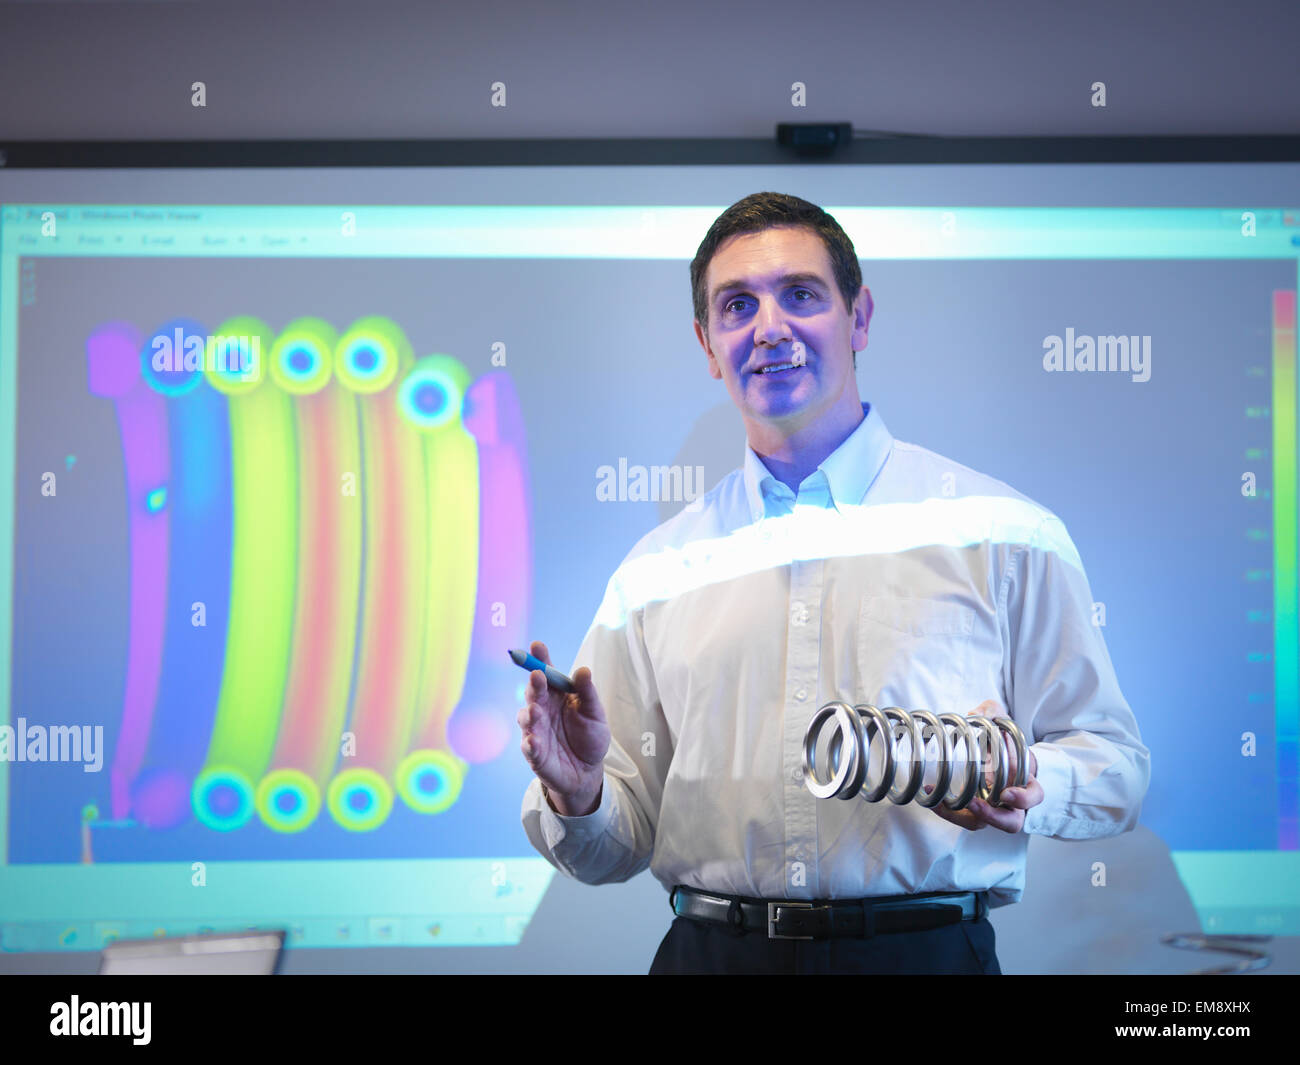 Engineer making business presentation in front of screen Stock Photo